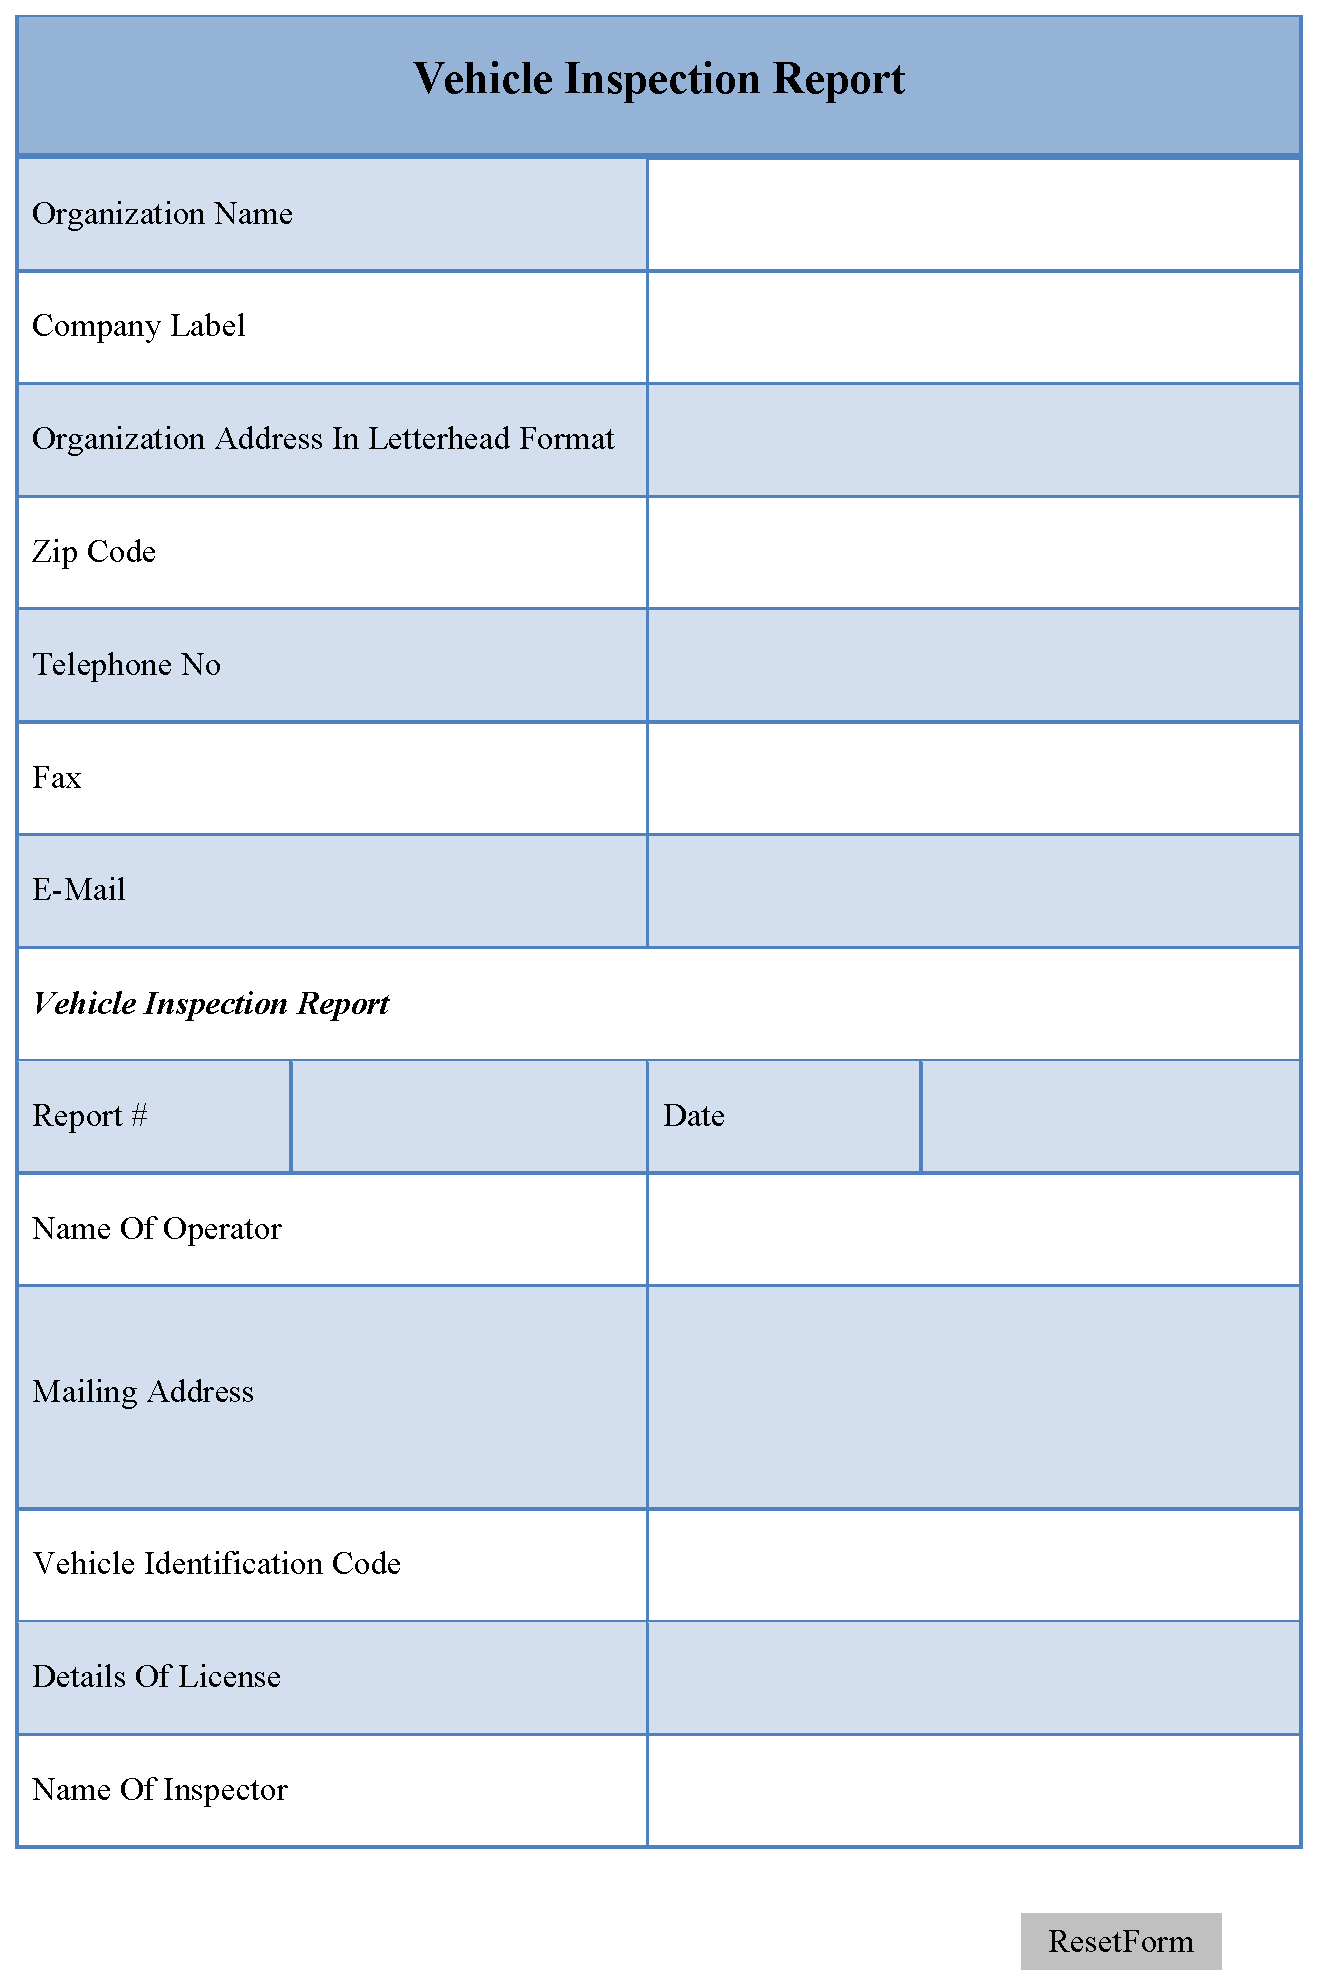 Vehicle Inspection Report Template | Editable Forms In Vehicle Inspection Report Template